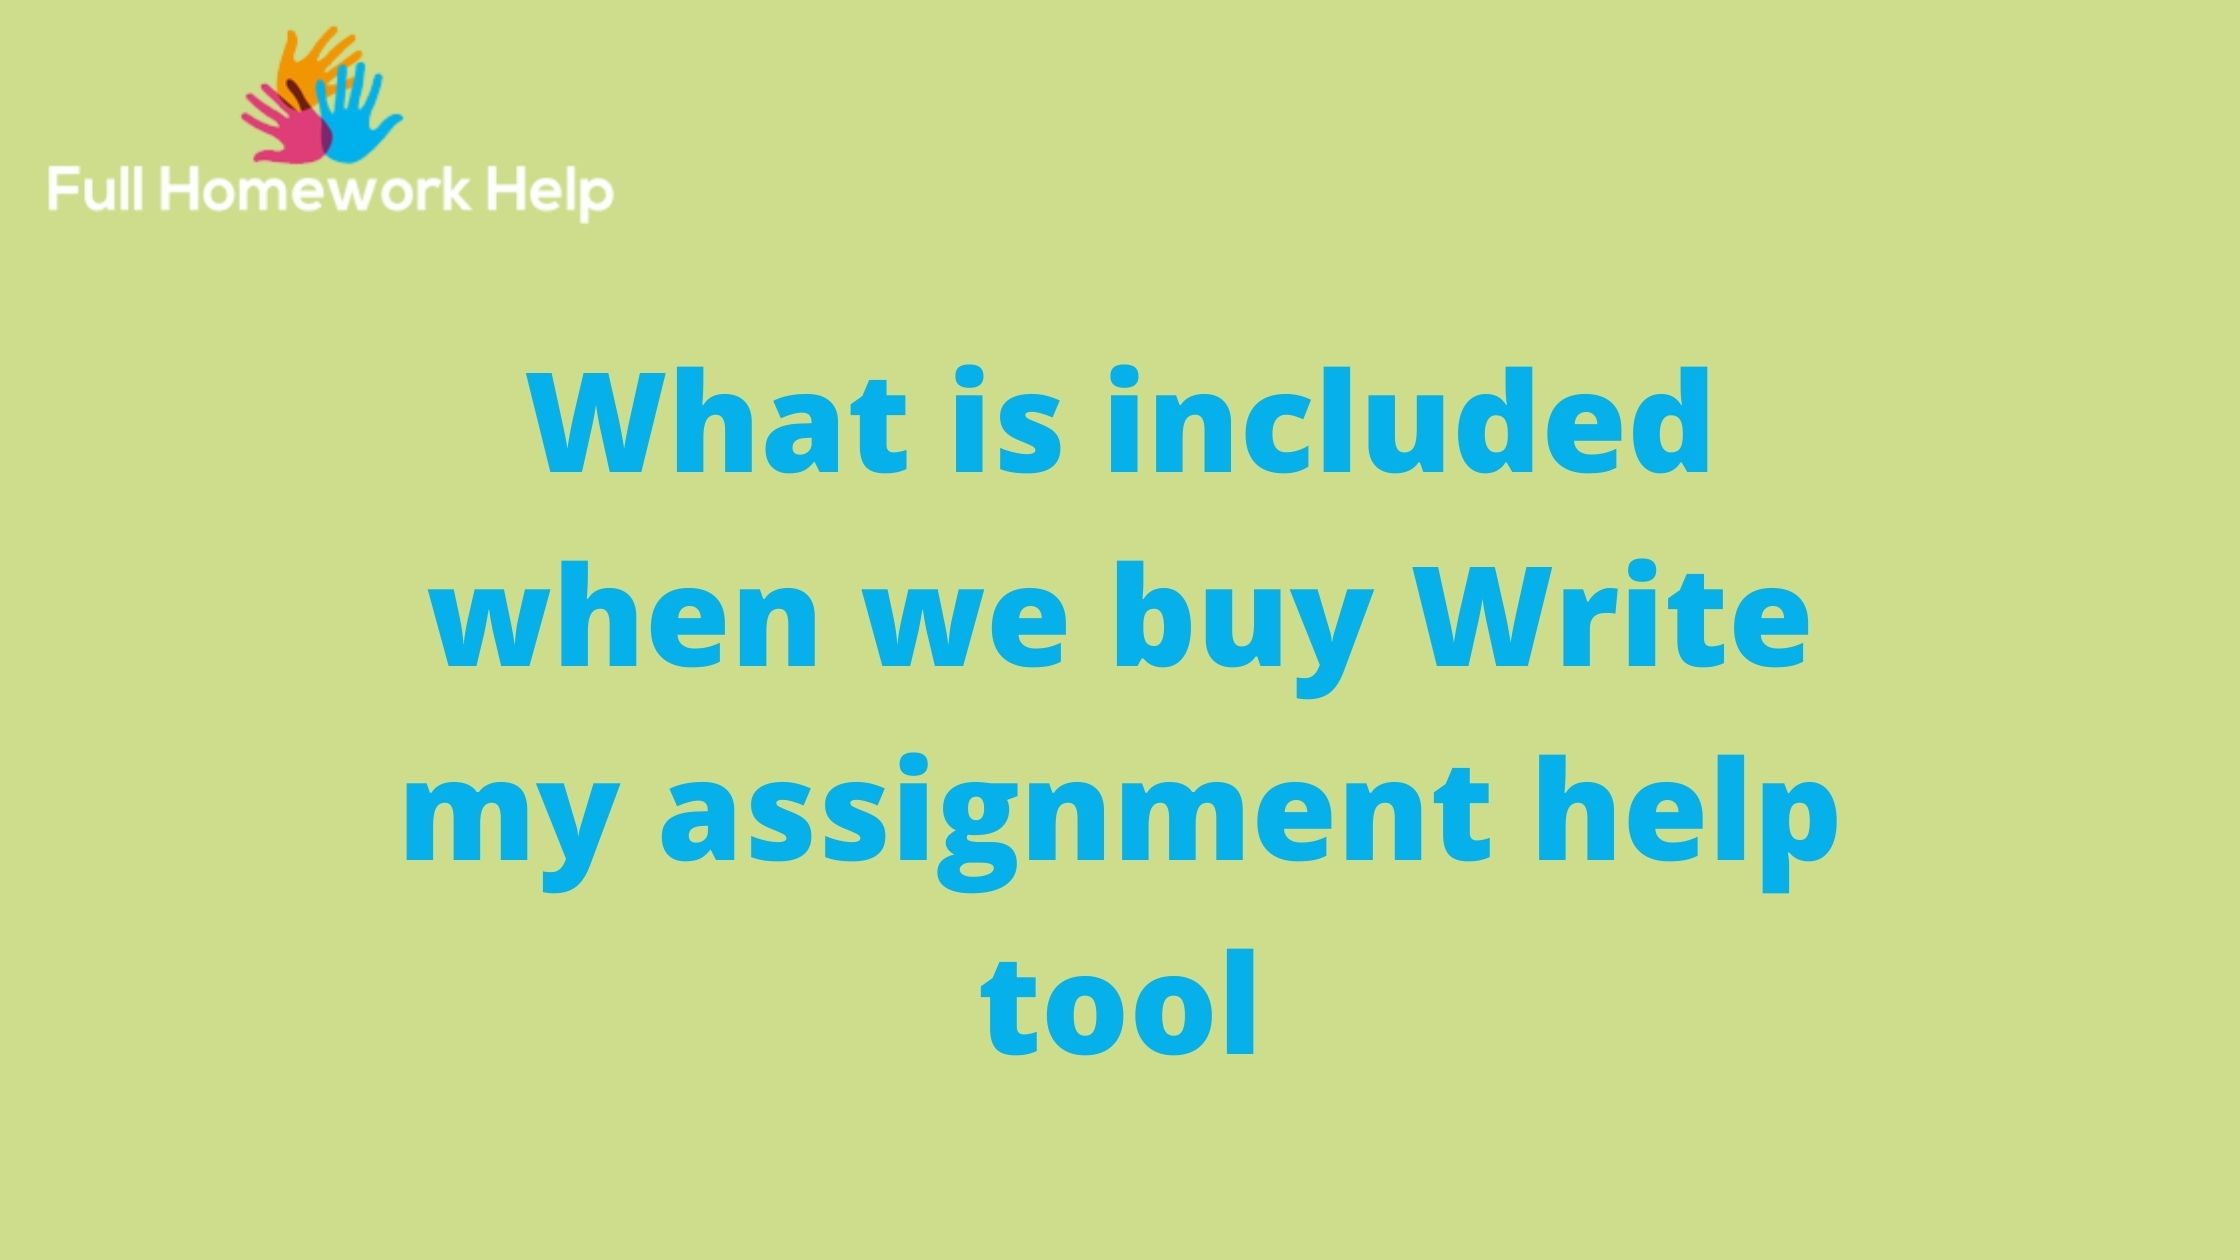 What is included when we buy write my assignment help tool